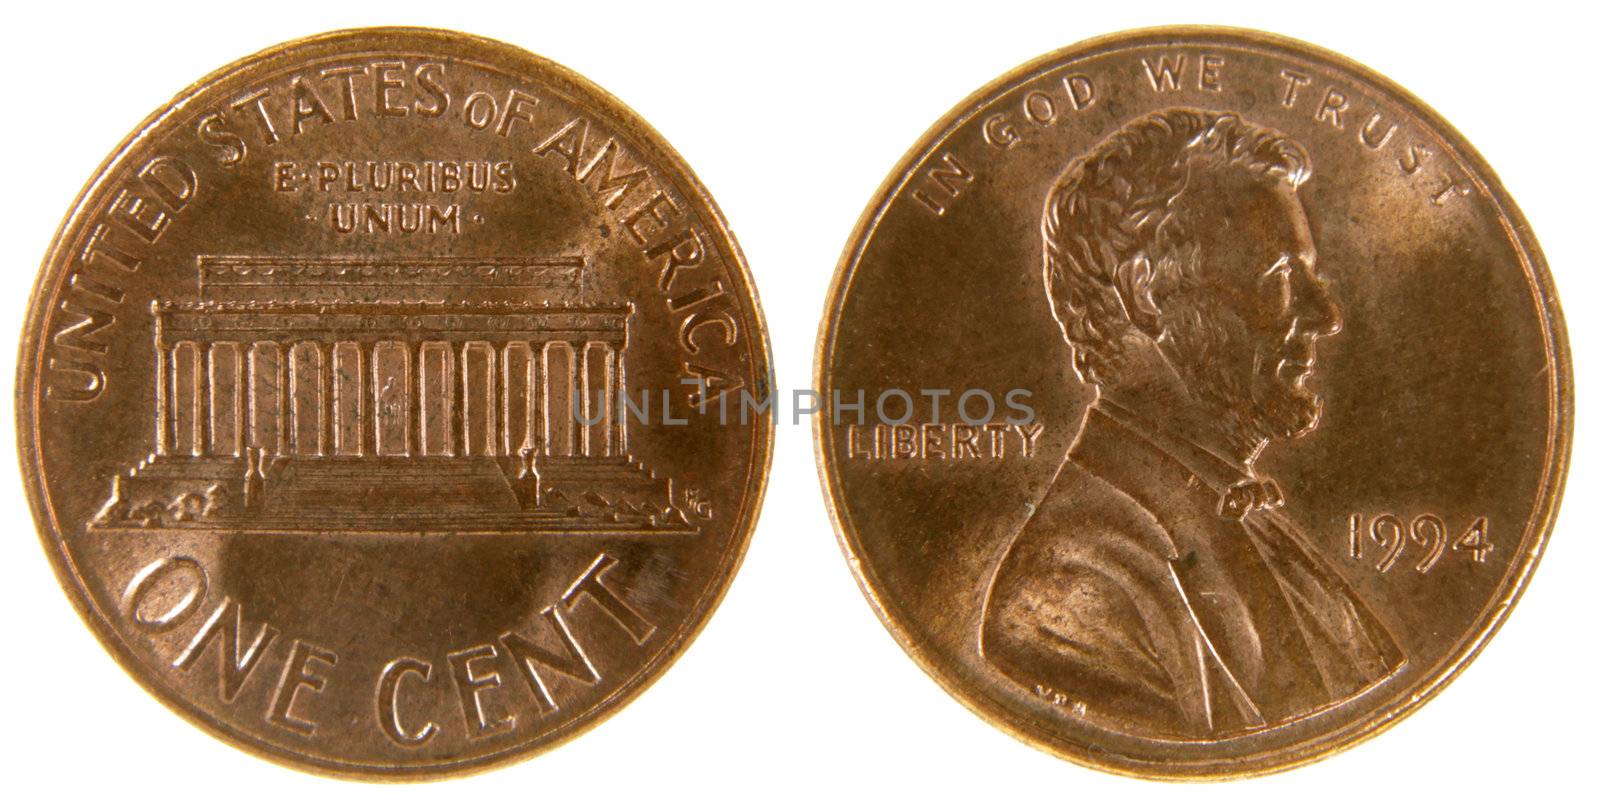 Both sides of a (1994) US penny, isolated on a white background.
